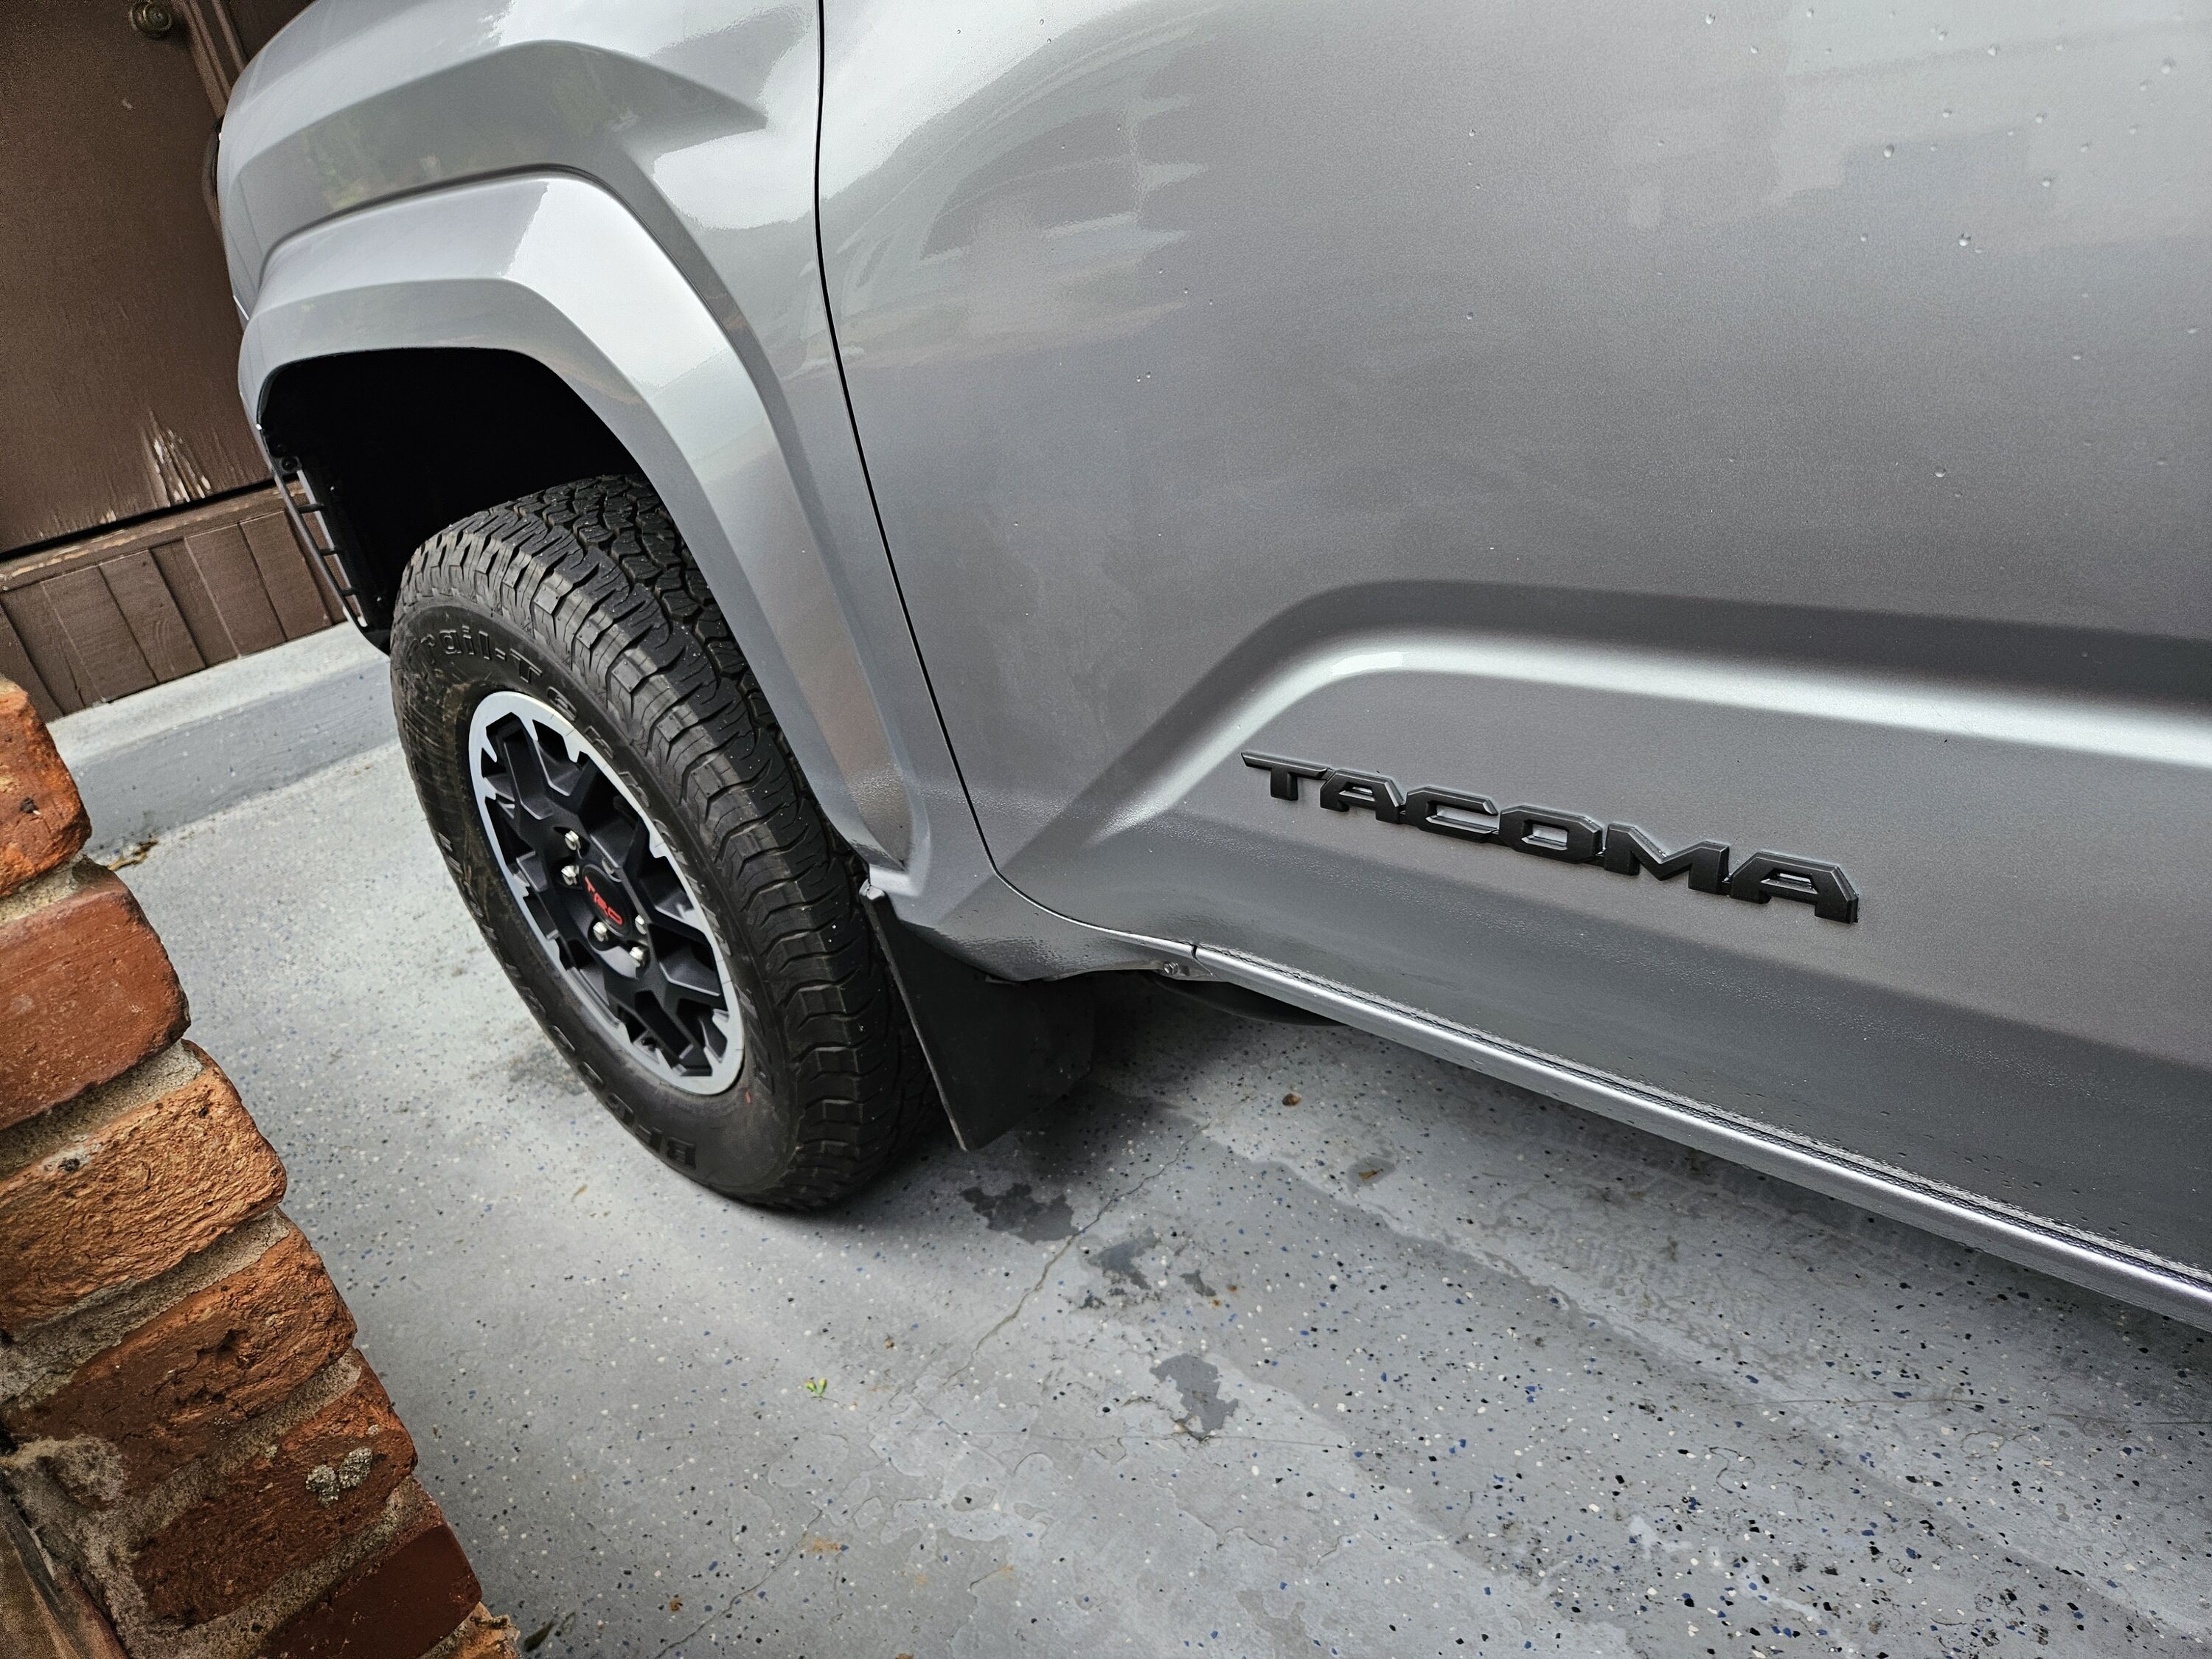 2024 Tacoma Xtracab 2024 Tacoma SR5 in Celestial Silver Metallic w/ better photos, different wheels, and a basic review 1000007630